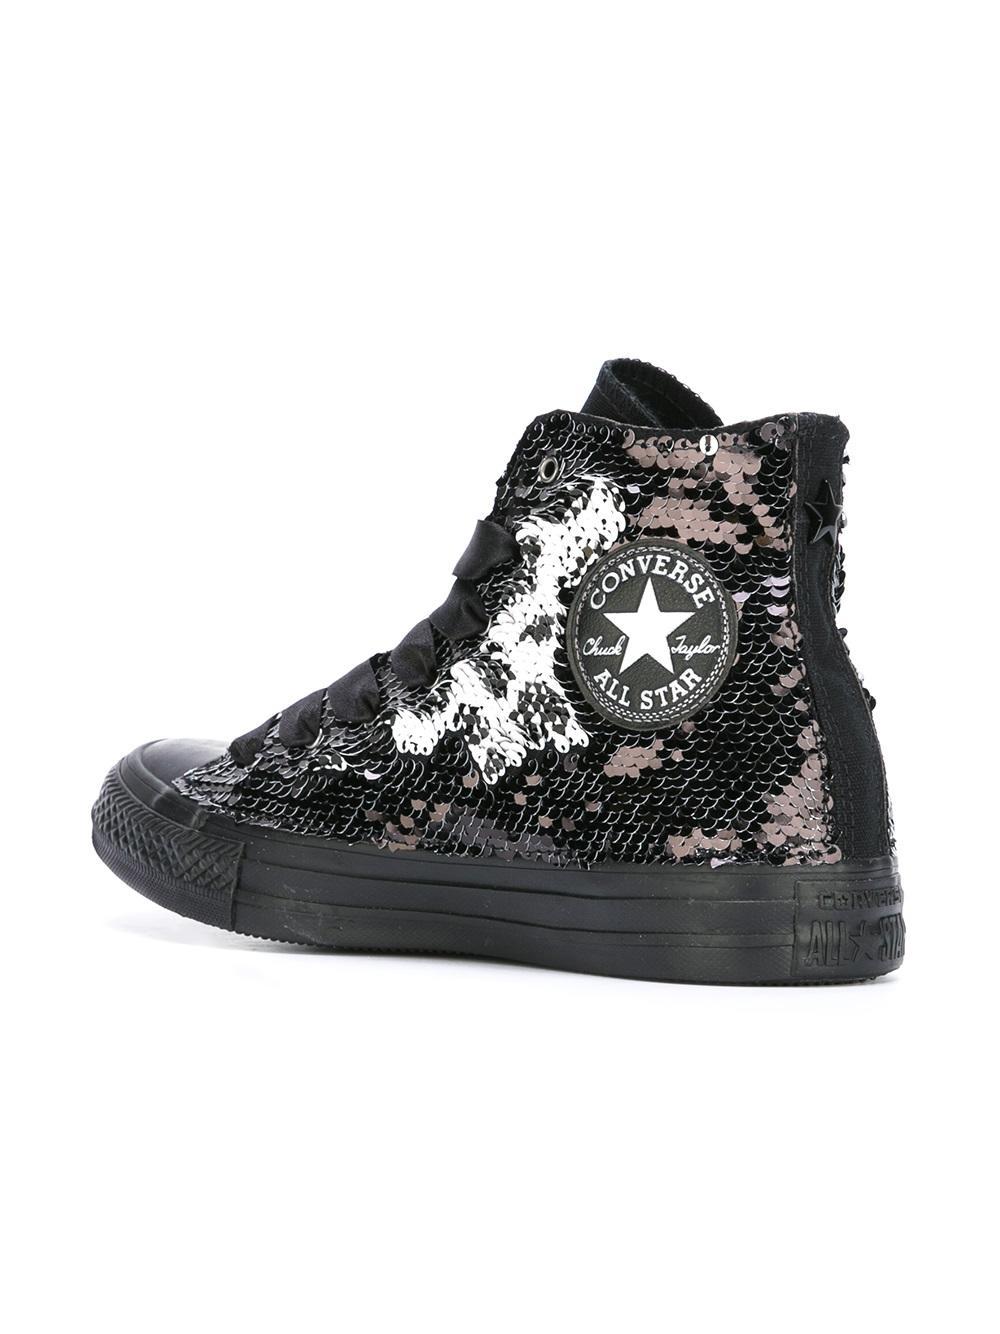 Converse Cotton 'all Star' Sequin Hi-top Sneakers in Black - Lyst